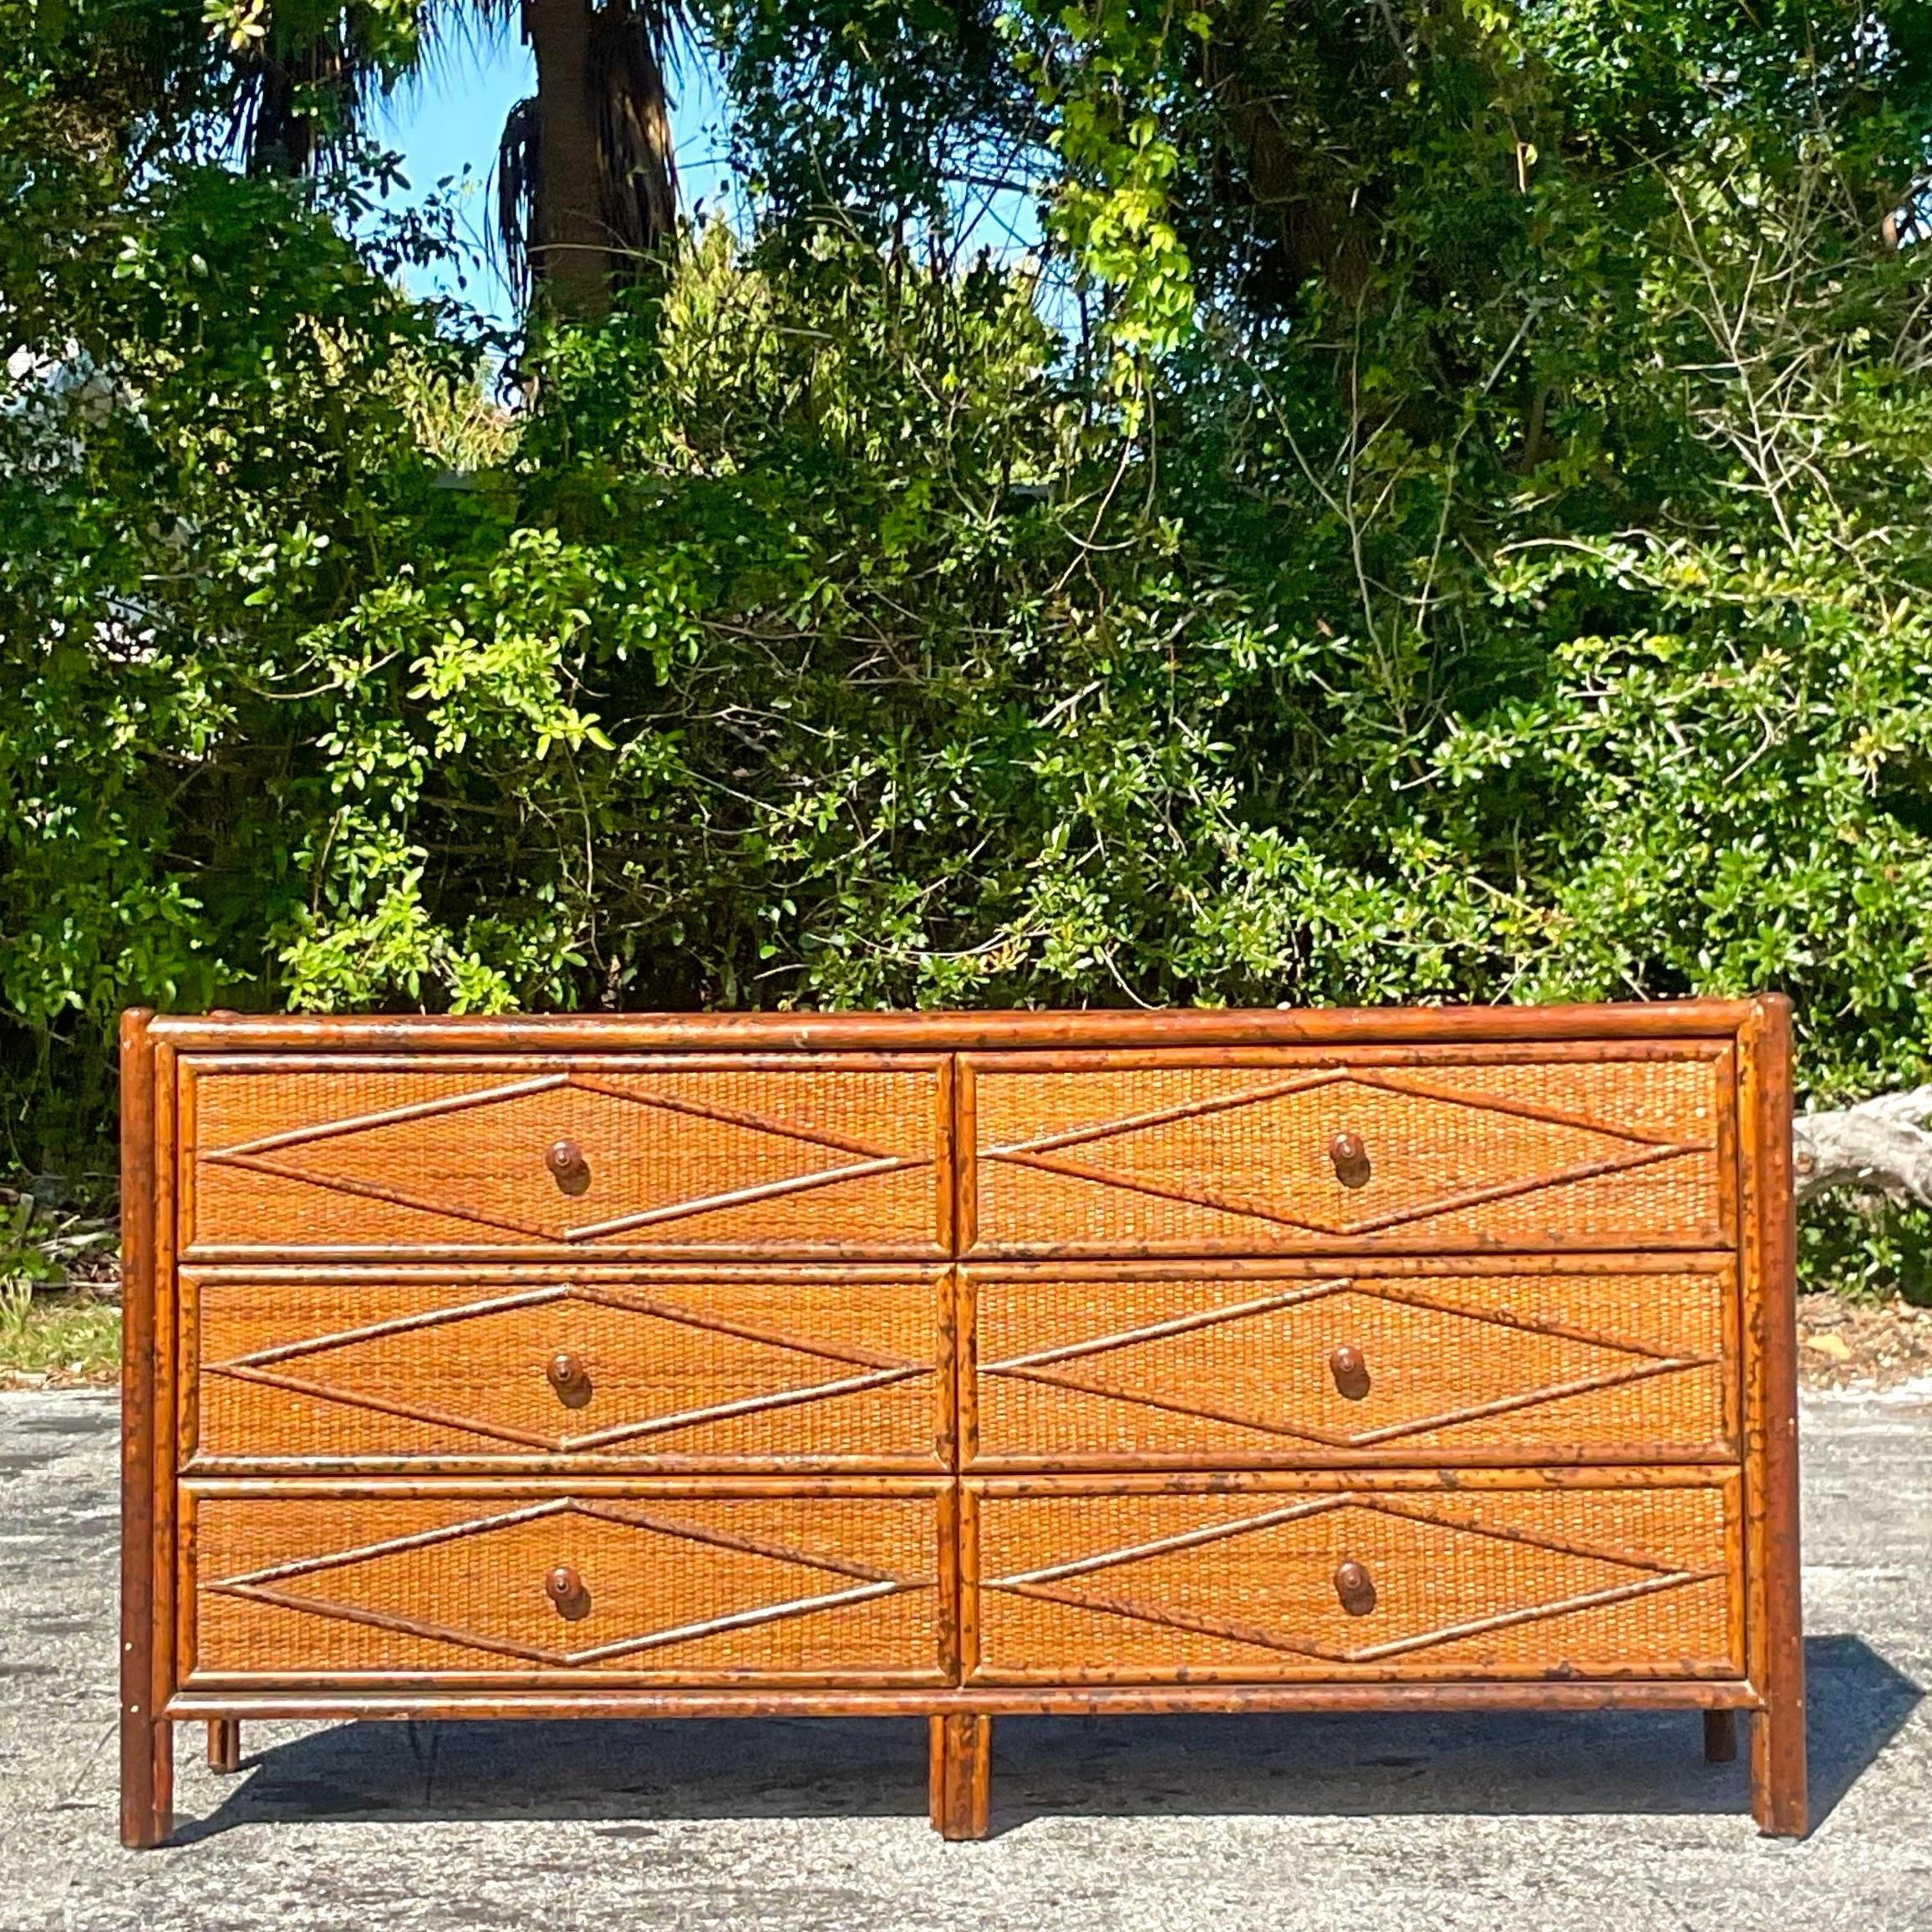 Bohemian Chic Meets Rustic Elegance: The Vintage Burnt Bamboo Diamond Dresser. Add a touch of American flair to your space with this unique piece, blending eclectic boho vibes with the warmth of natural materials for a statement dresser that's both